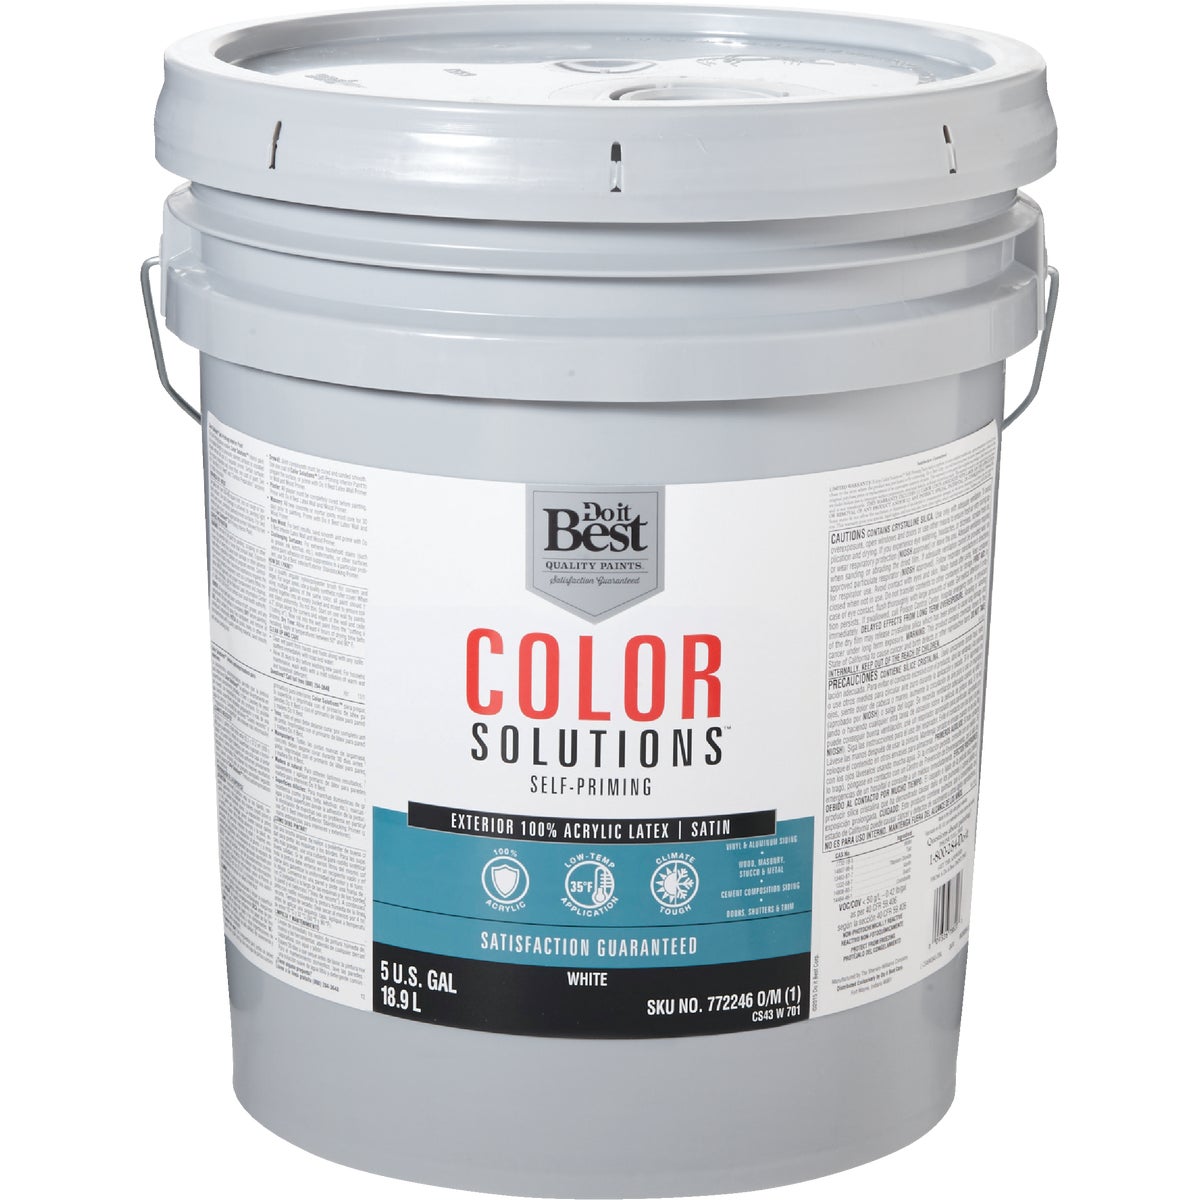 Do it Best Color Solutions 100% Acrylic Latex Self-Priming Satin Exterior House Paint, White, 5 Gal.